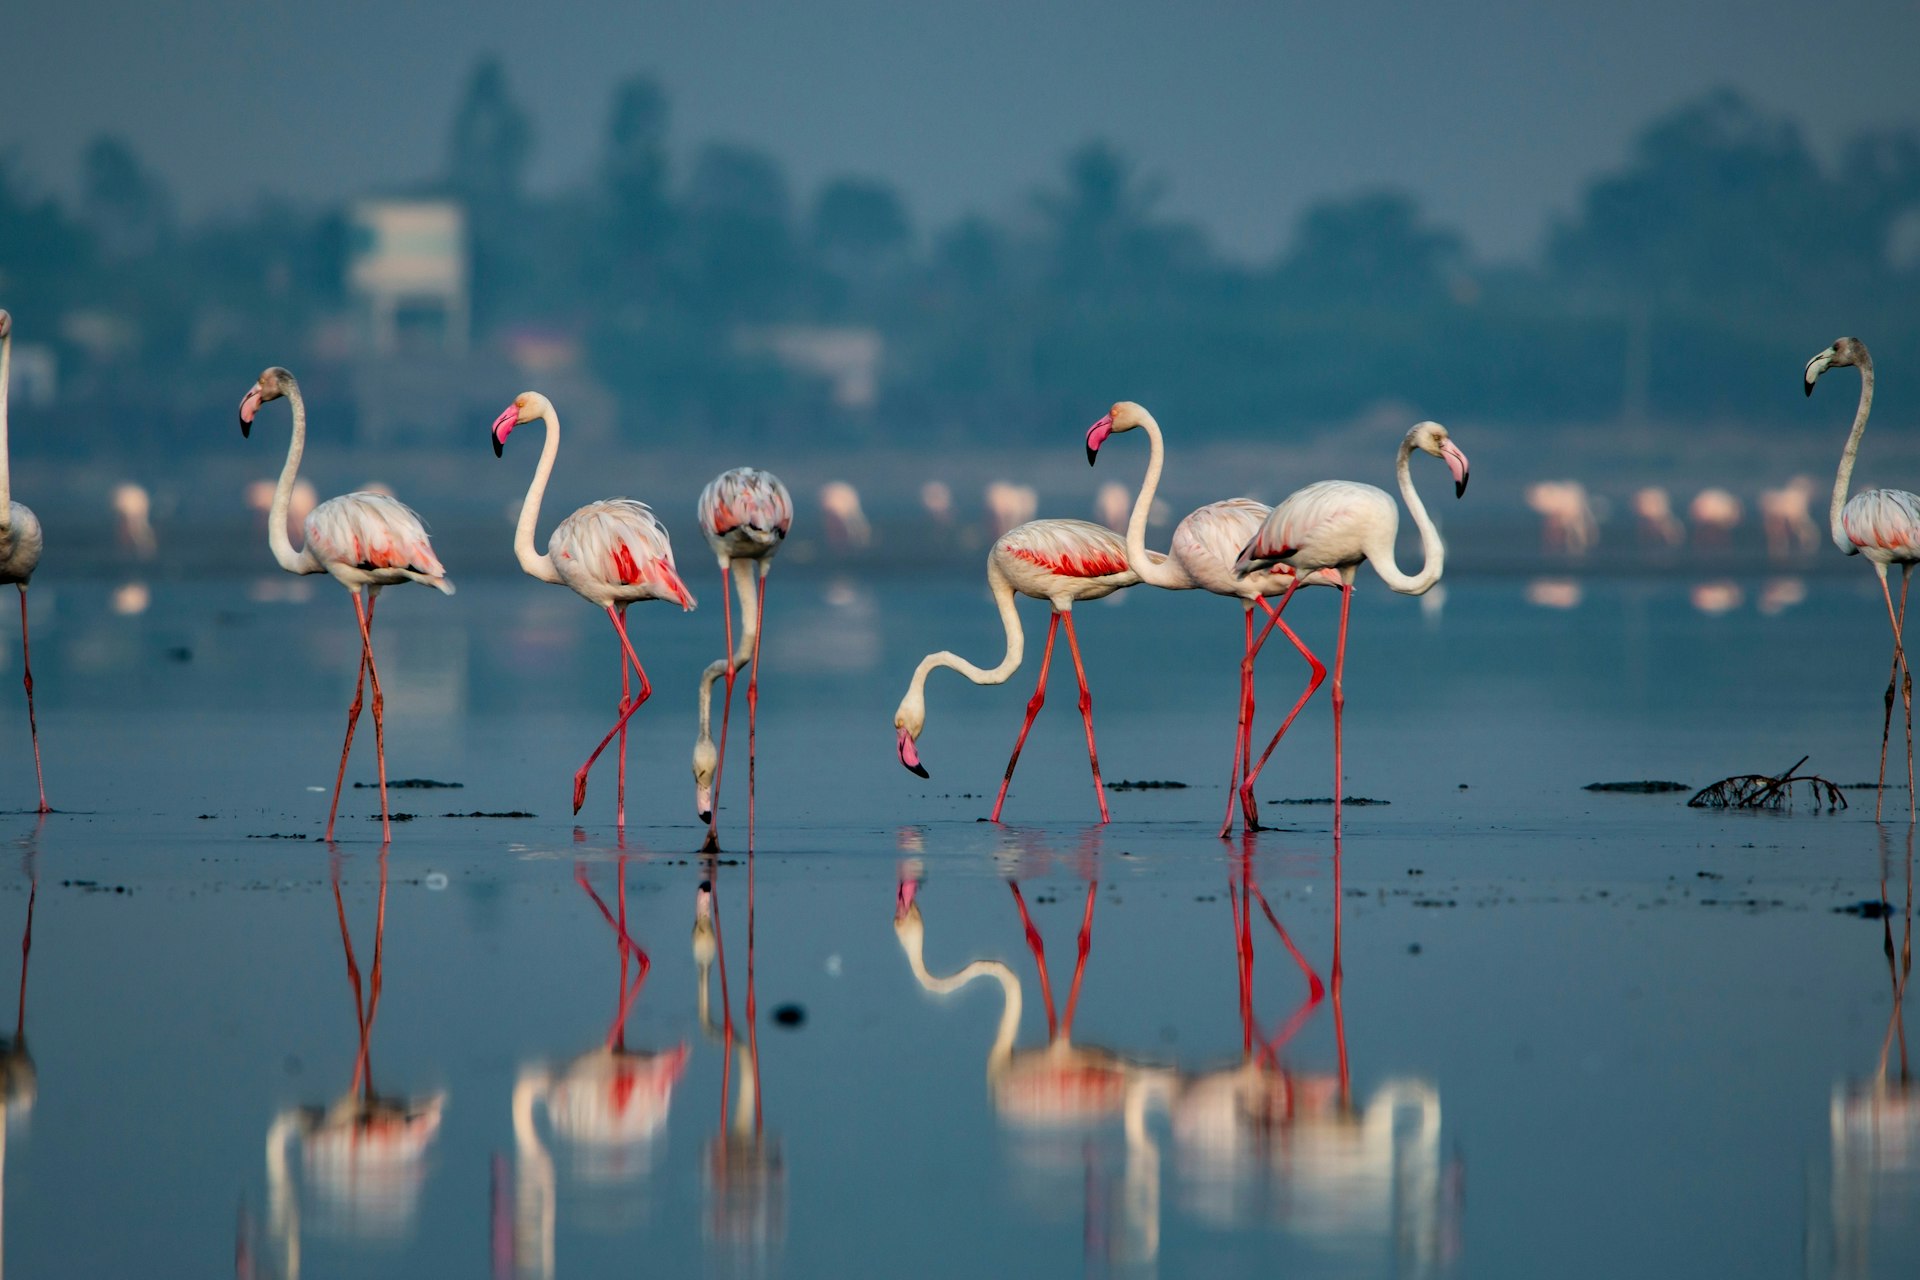 A flock of pink flamingos stand in the shallow waters of Pulicat Lake. More flamingos are visible, slightly out of focus, in the background.